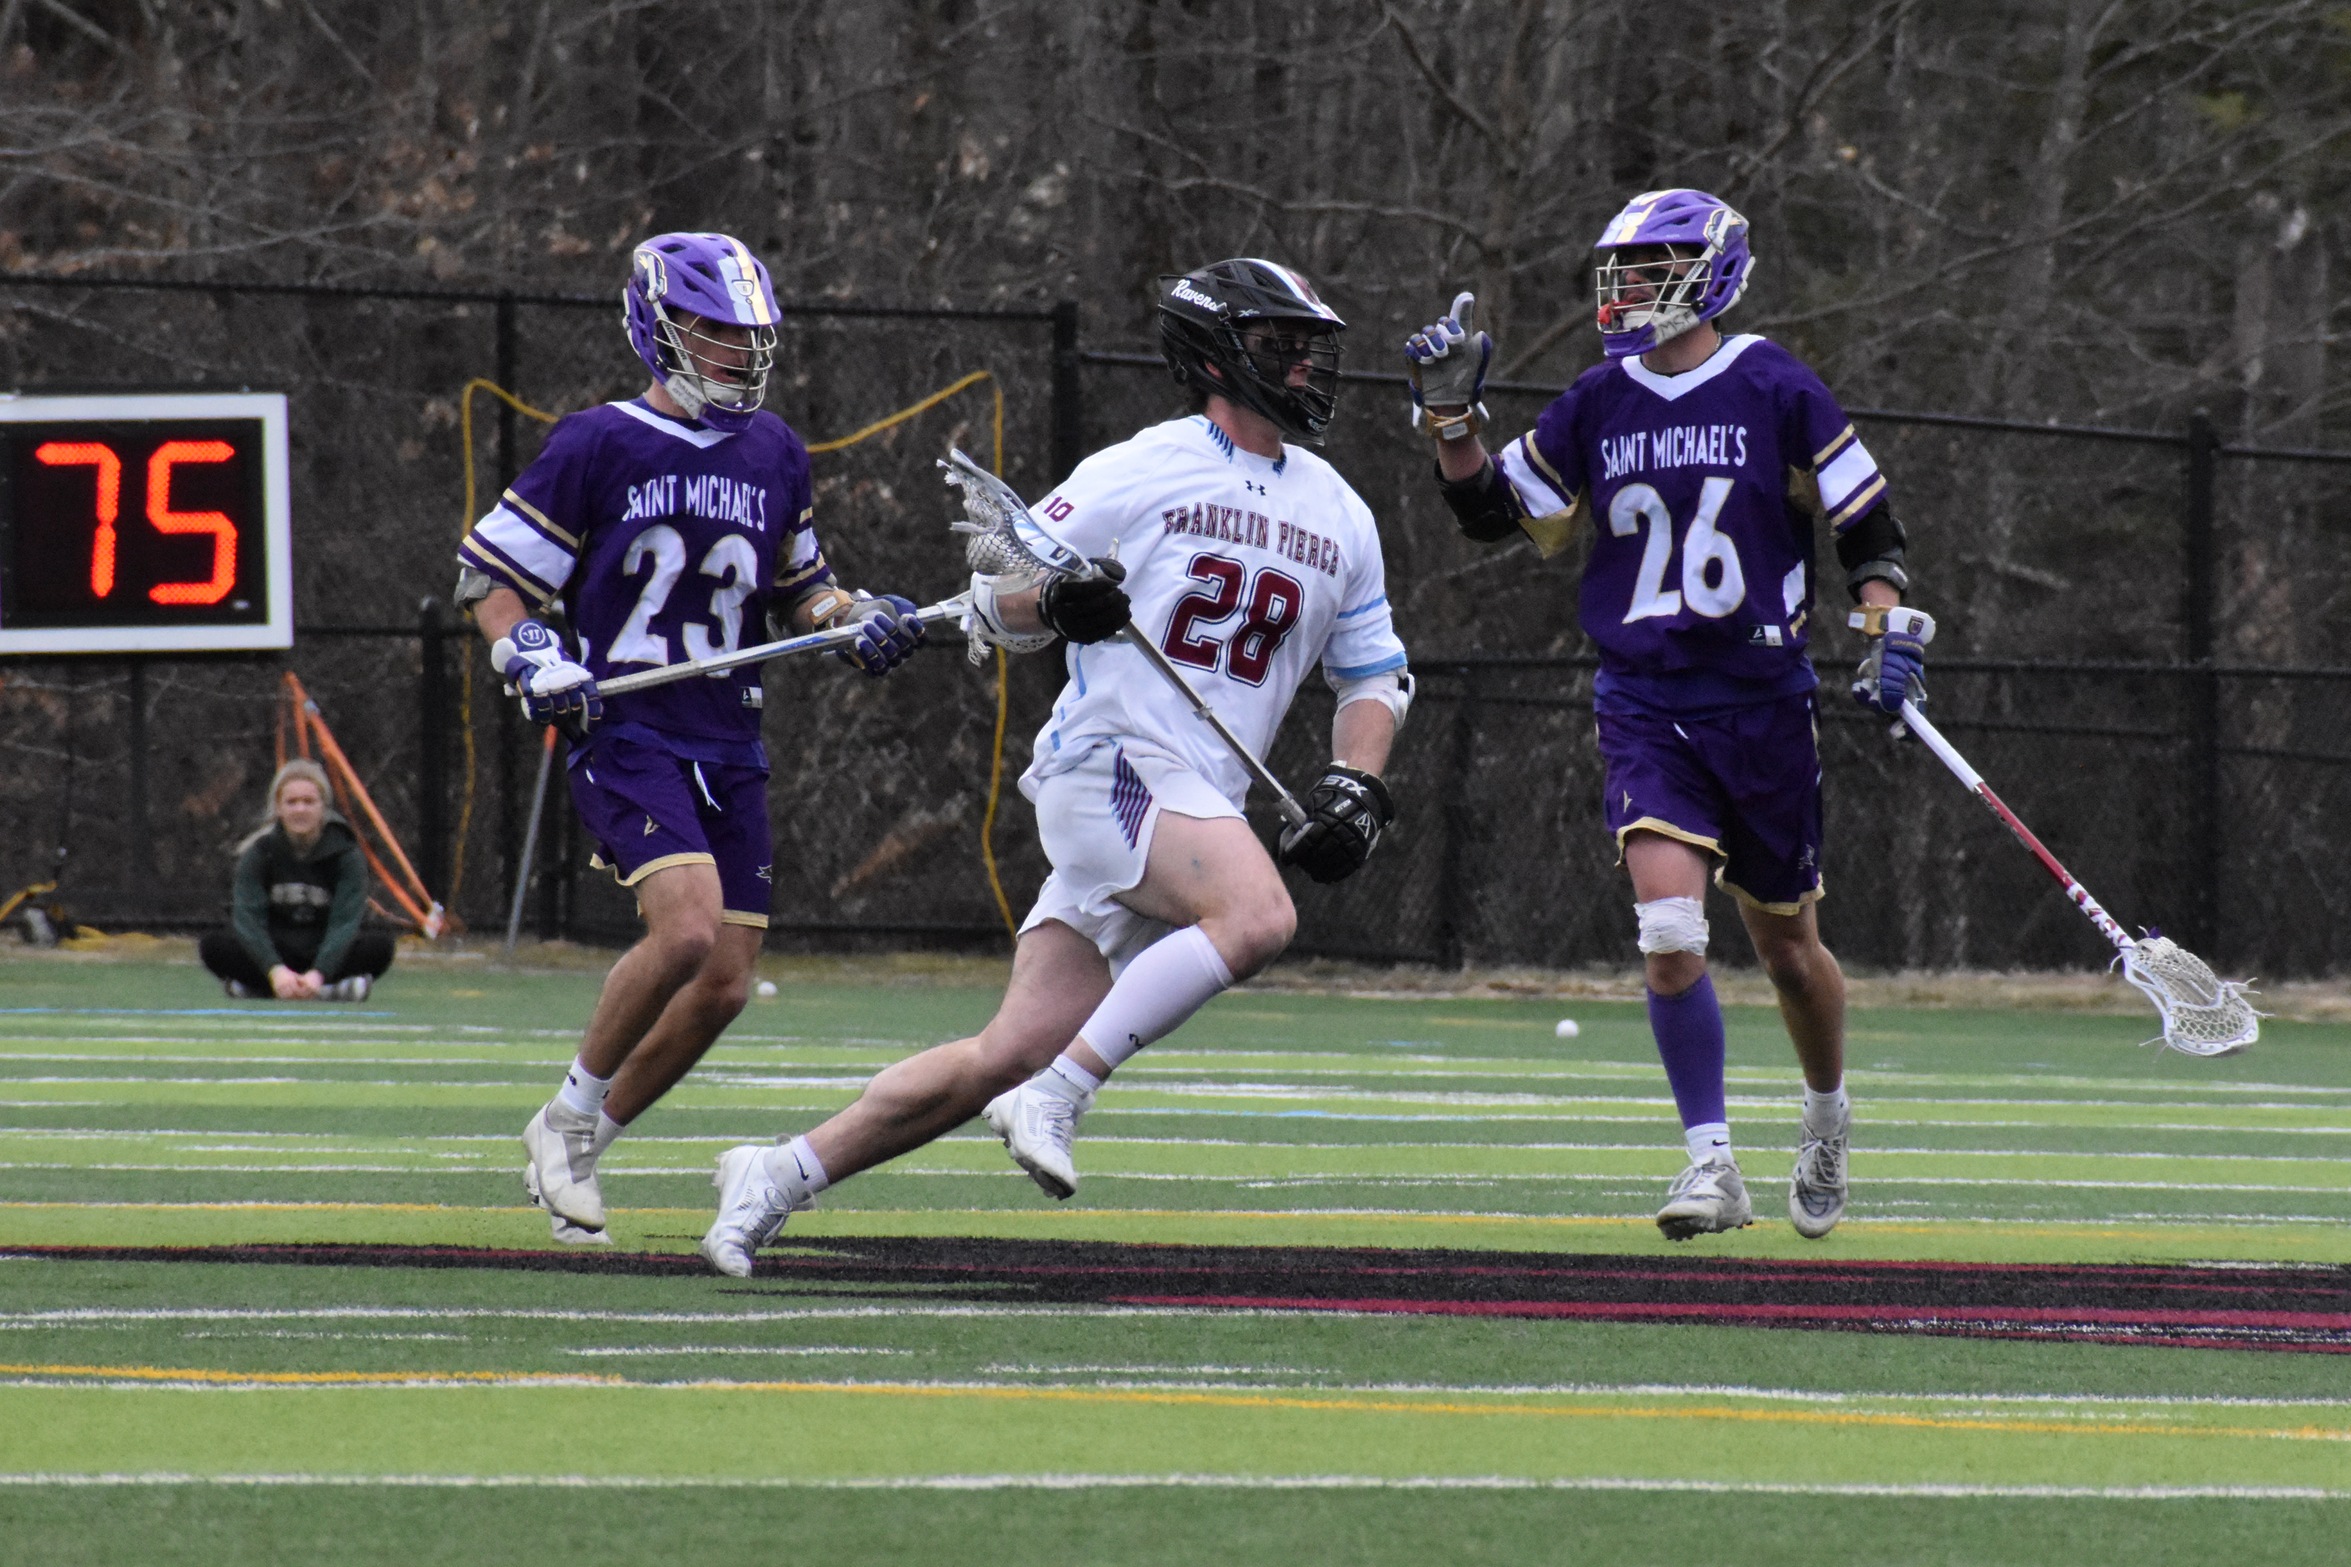 Men's Lacrosse Outlasted by Saint Michael's College in 14-11 Loss